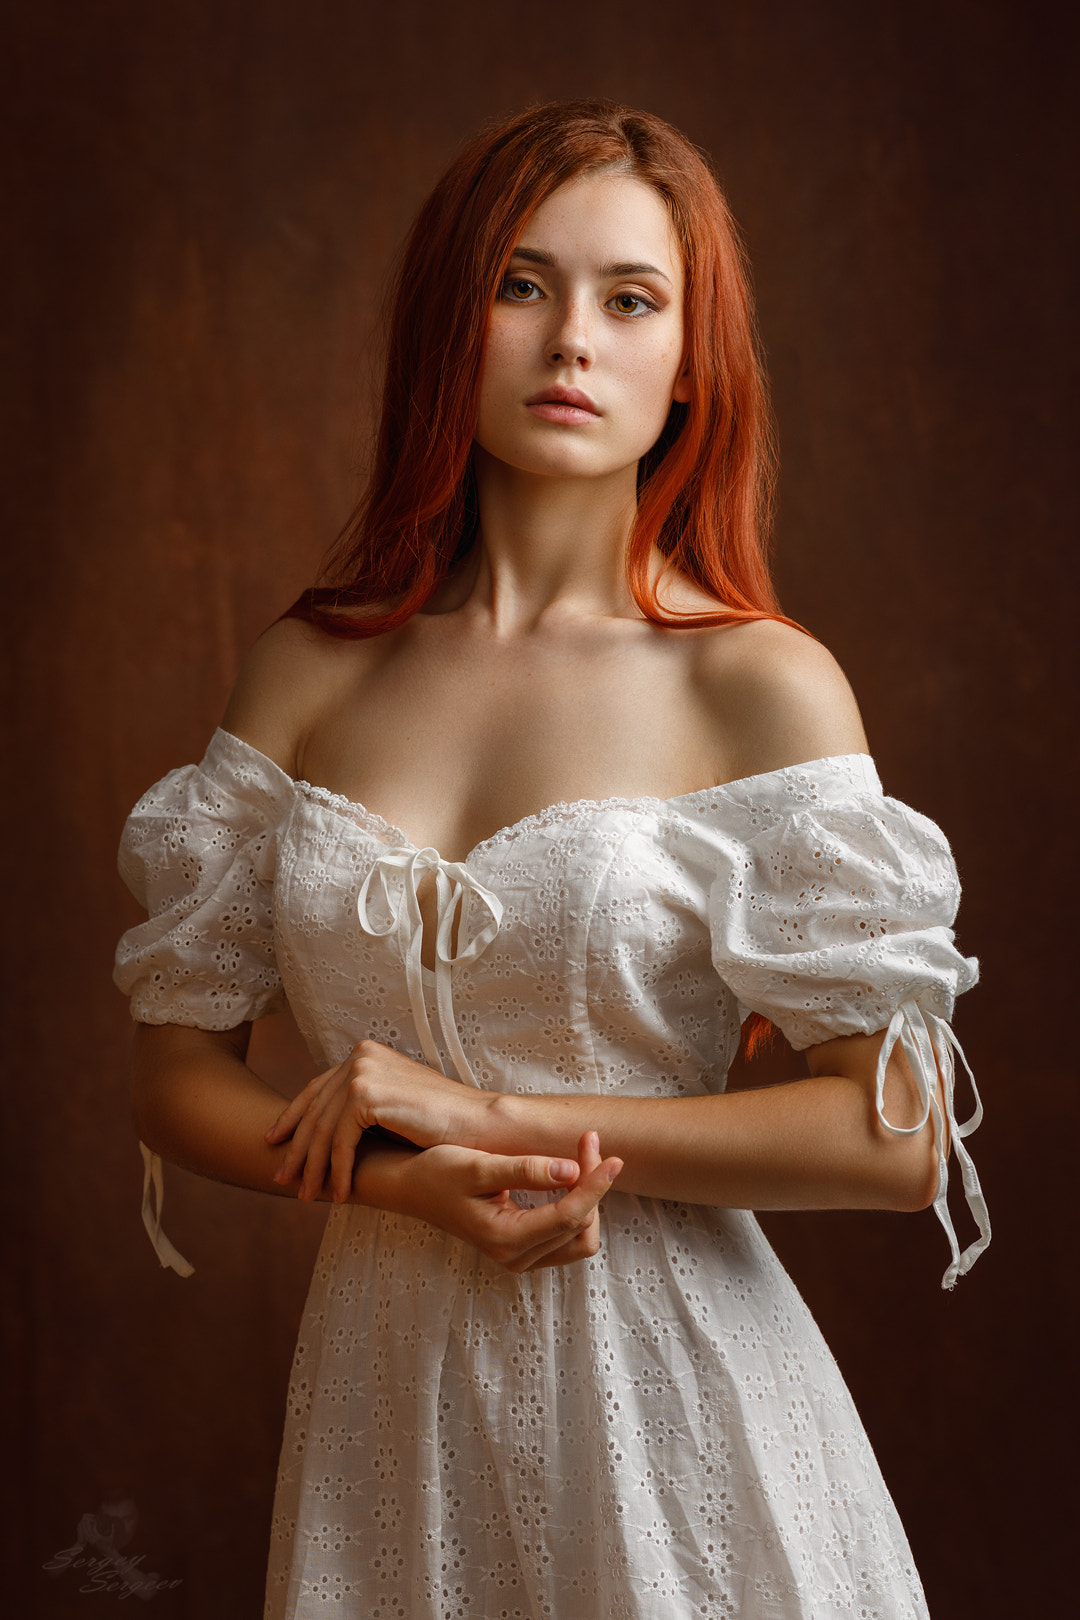 Sergey Sergeev Women Redhead Bare Shoulders Dress White Clothing Freckles Simple Background 1080x1620